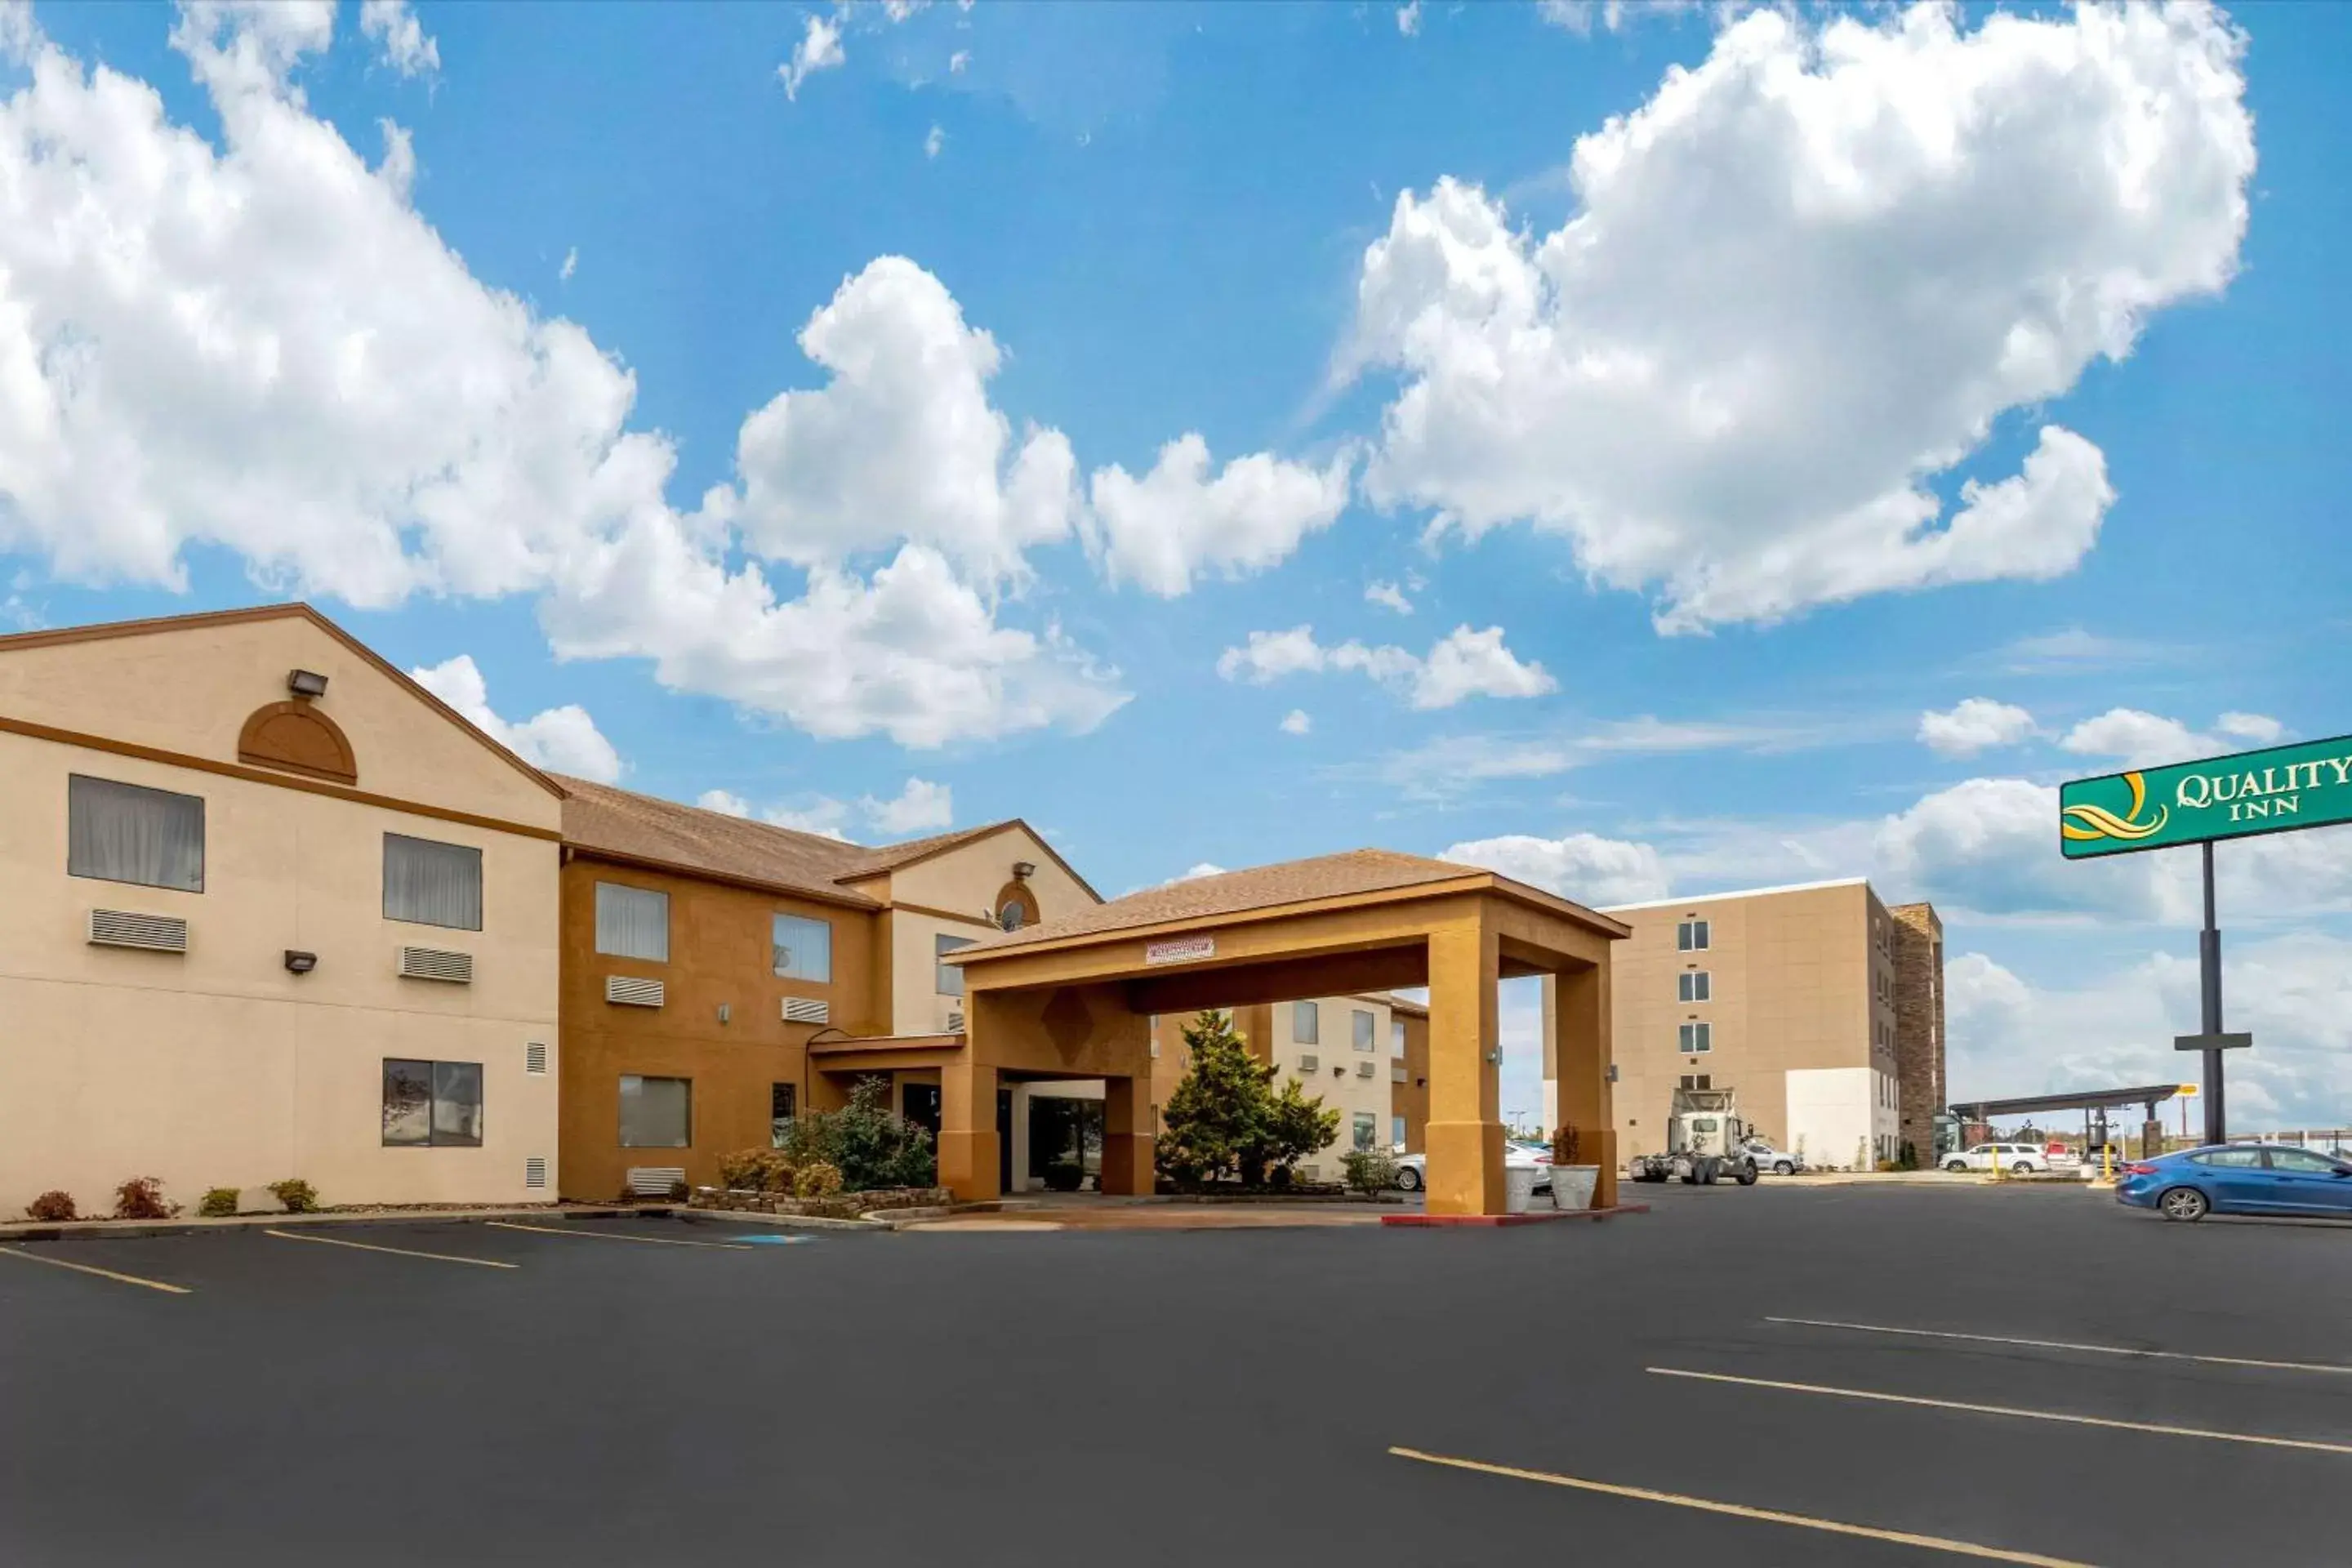 Property building in Quality Inn West Memphis I-40